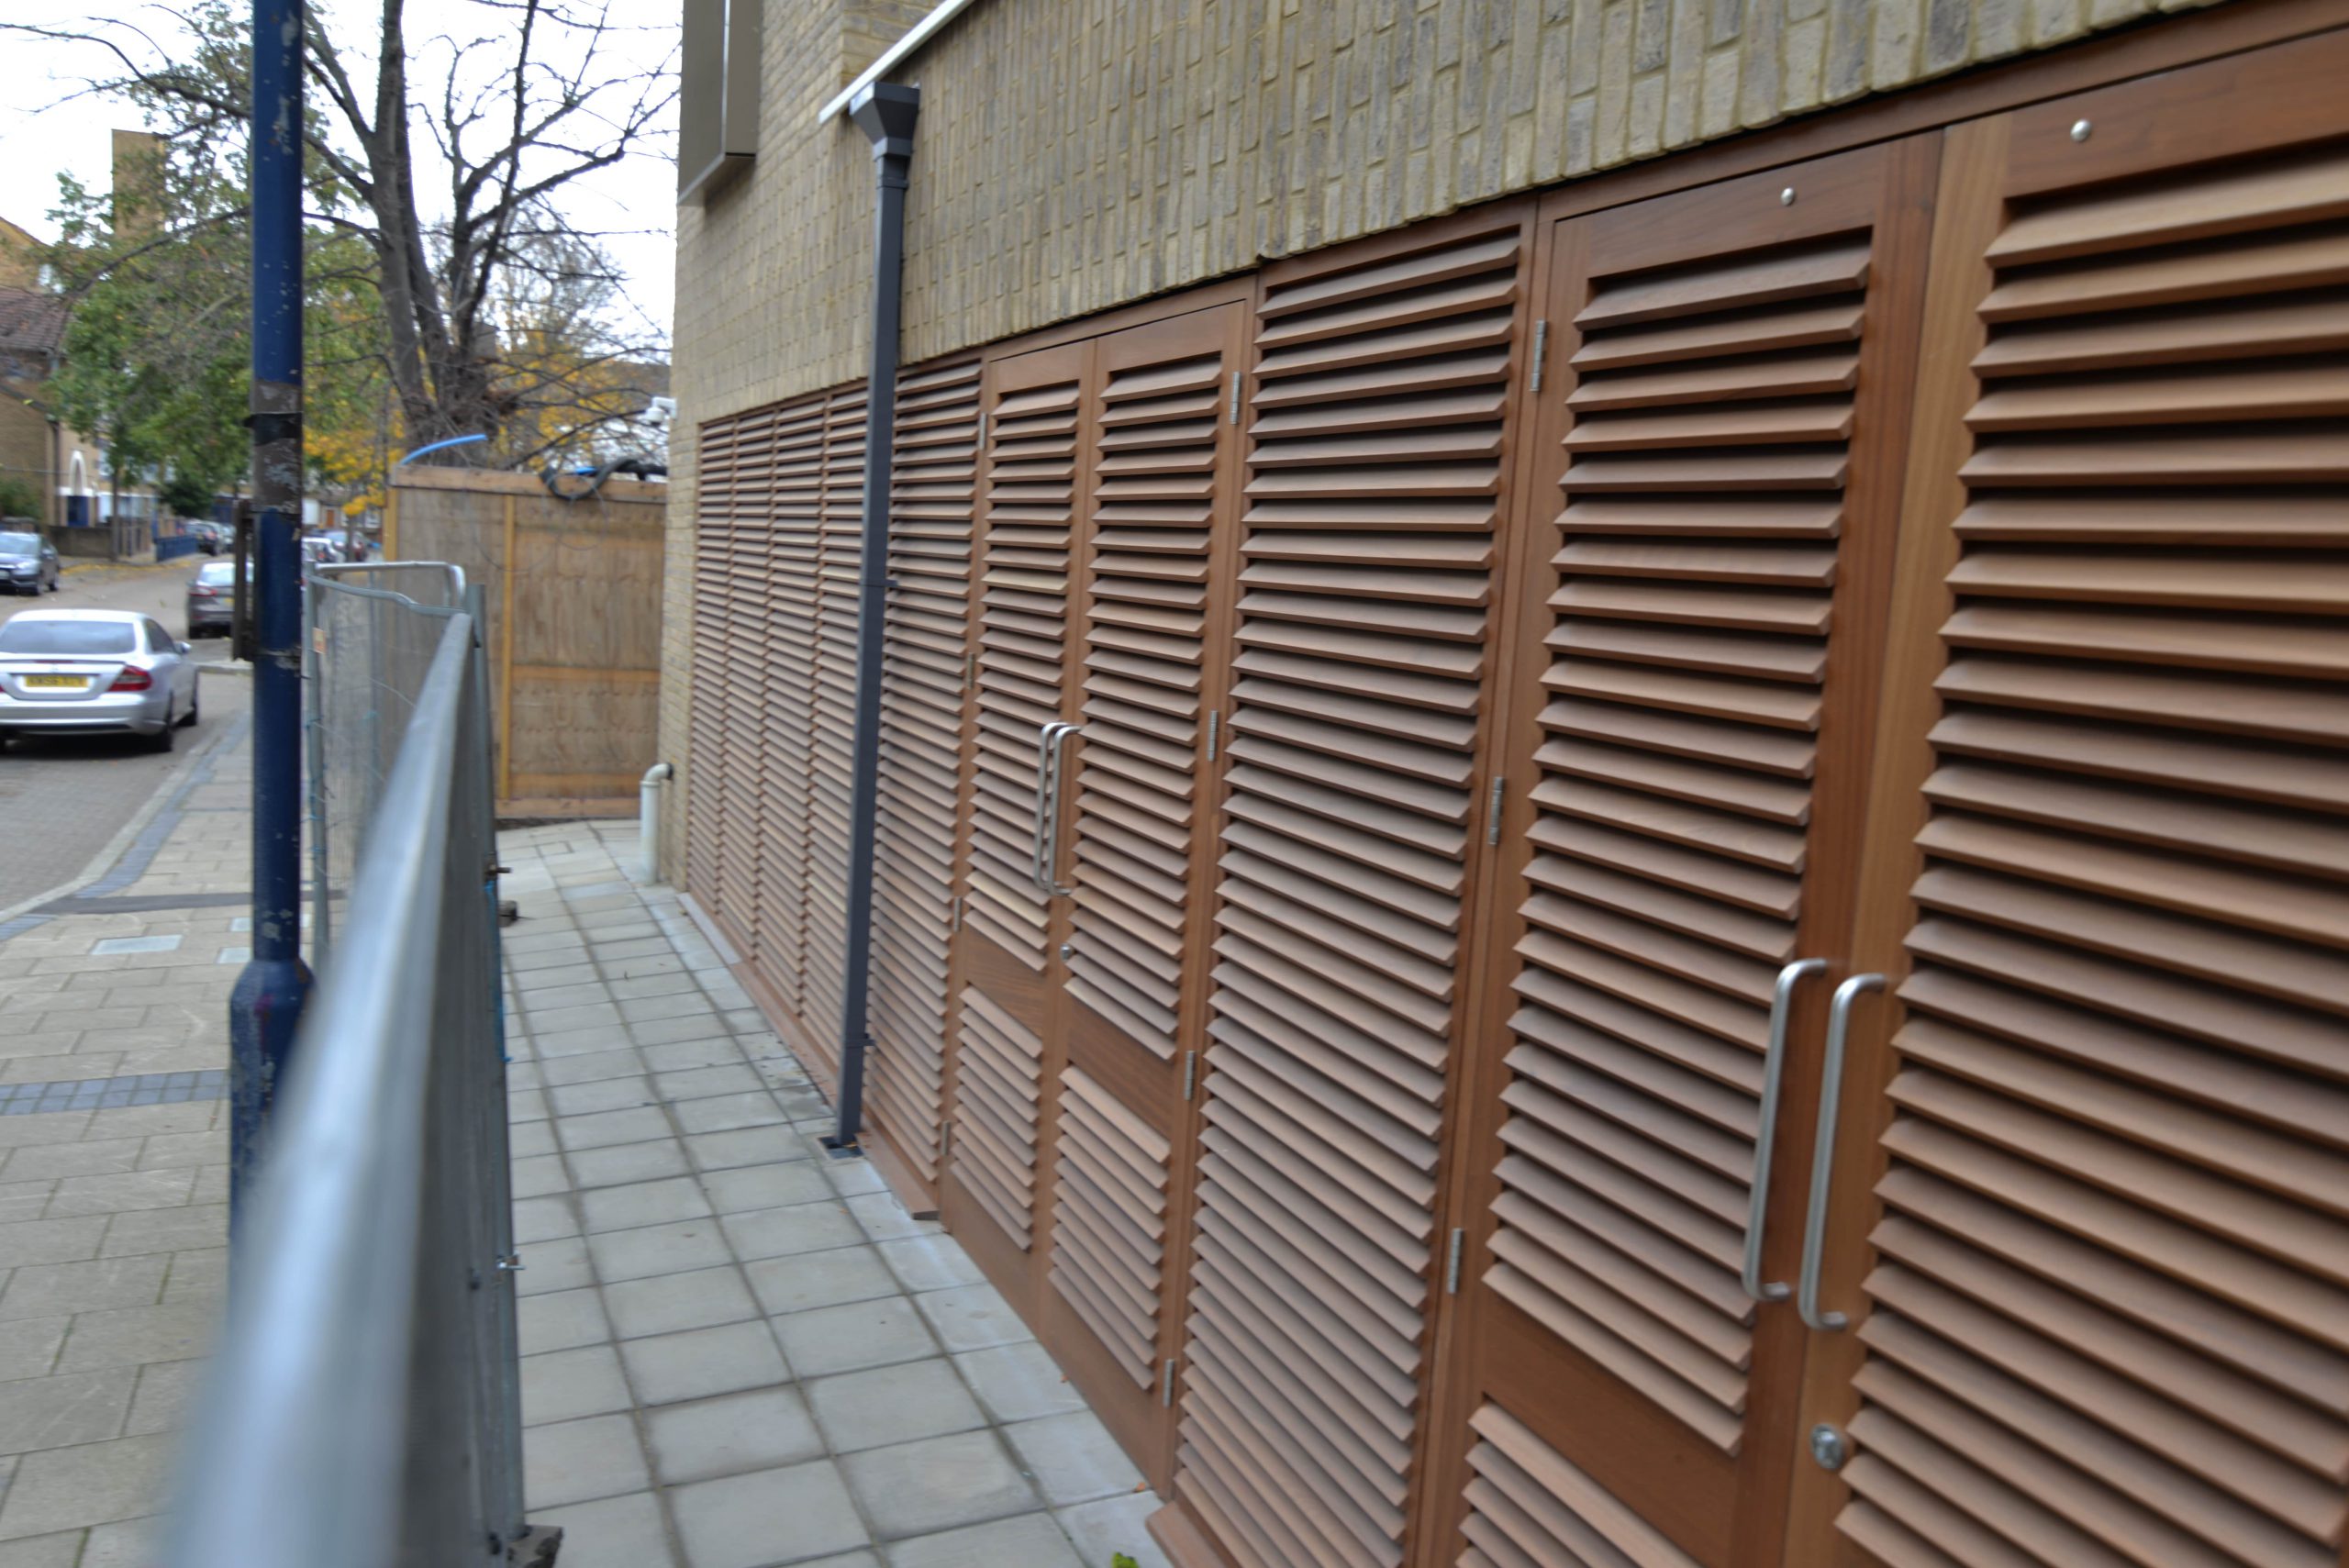 INDUSTRIAL STEEL DOUBLE LOUVERED DOOR SETS FABRICATED TO LPS1175 SR2 AND PAS24 STANDARD. PRODUCED AND INSTALLED BY PREMIER SECURITY CONSULTANTS LTD.